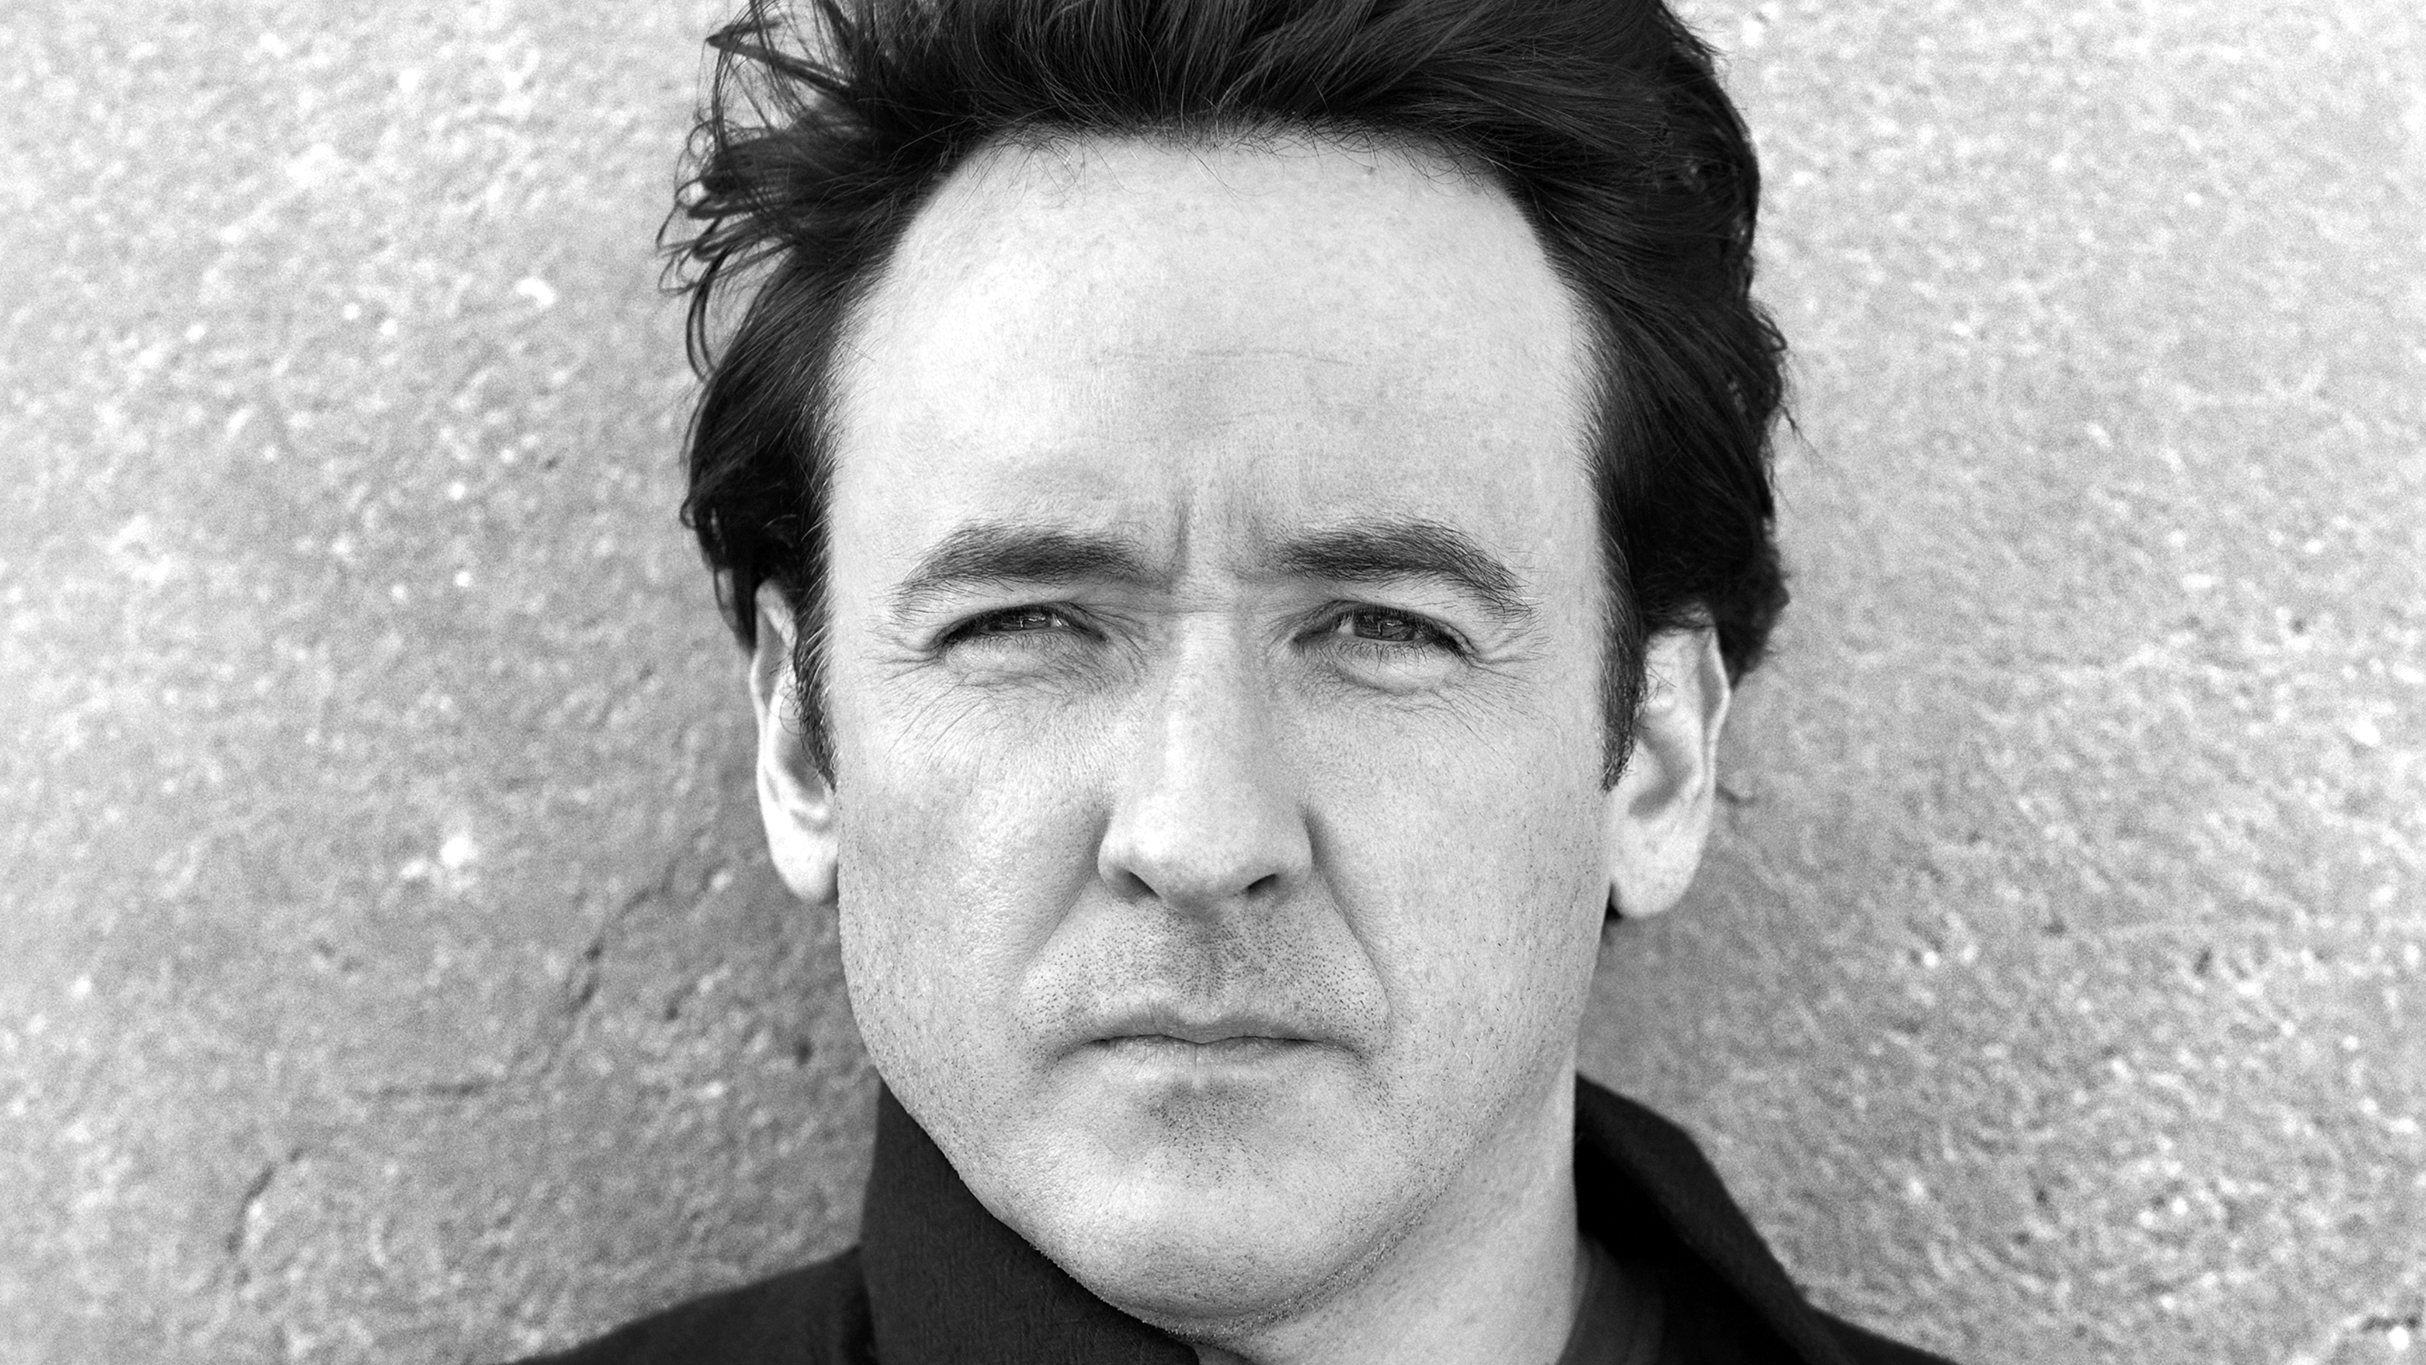 An Evening with John Cusack & Screening of "Say Anything"